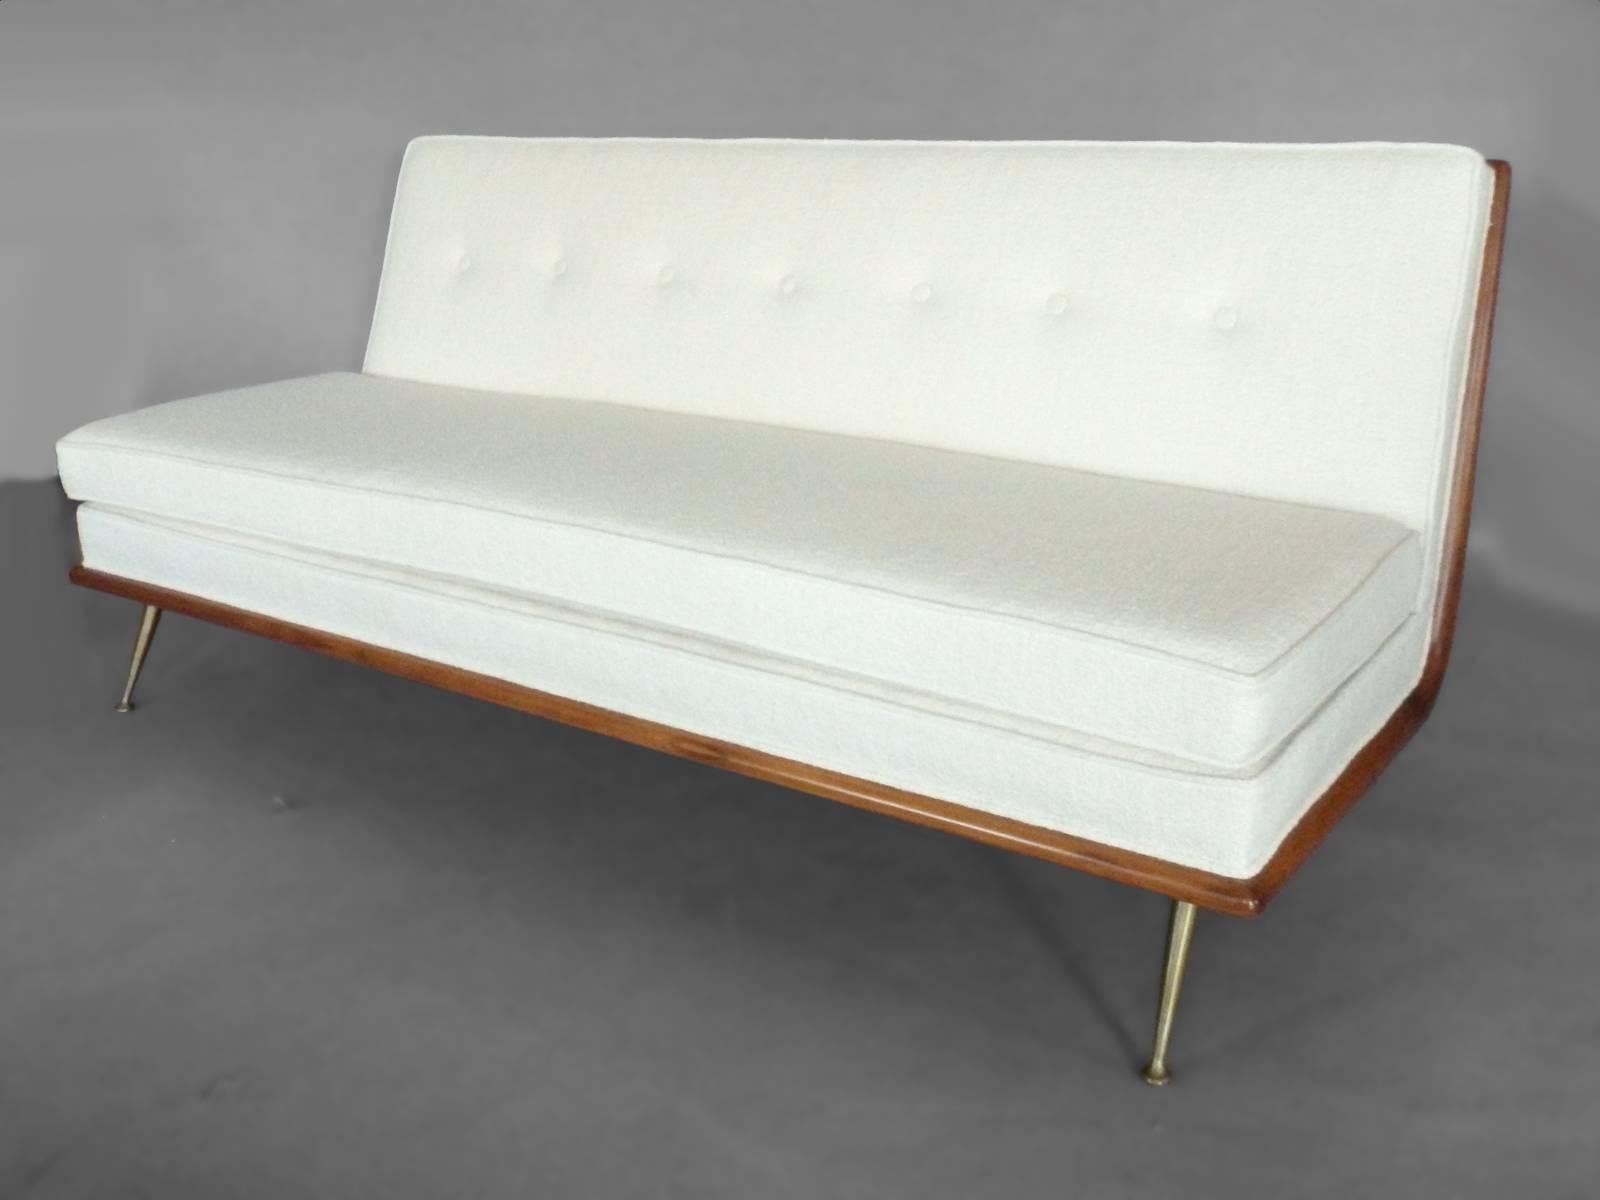 Couch by Robsjohn-Gibbings for Widdicomb Furniture.